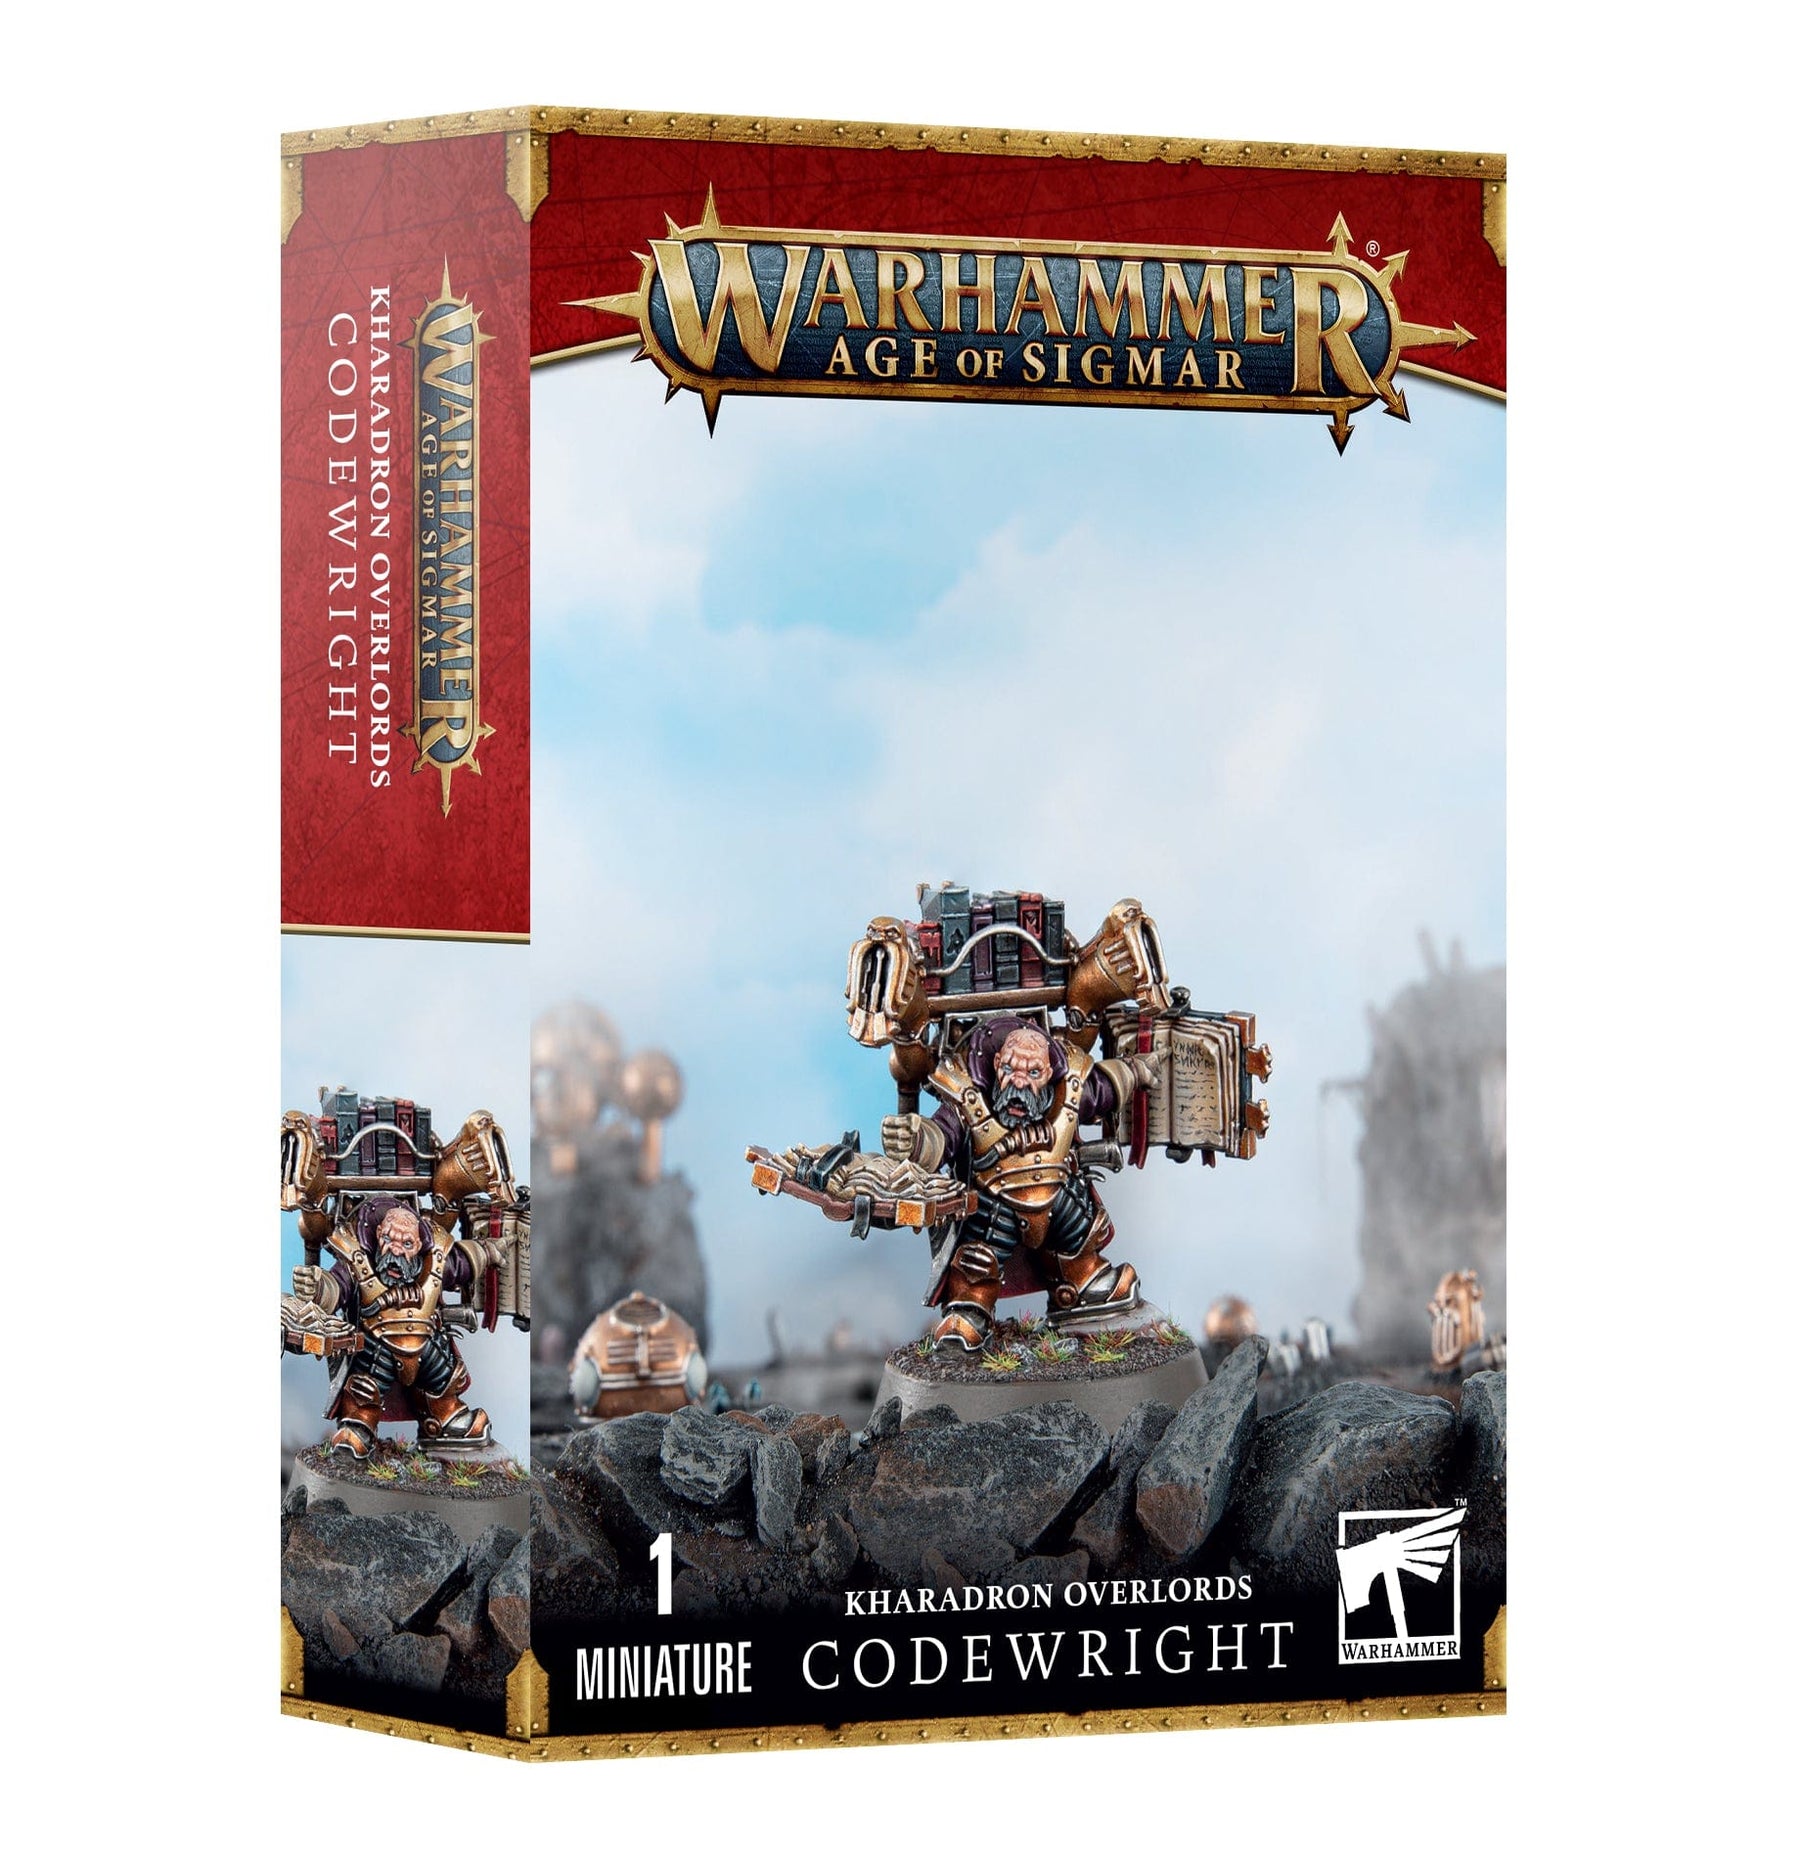 Warhammer - Age of Sigmar: Kharadron Overlords - Codewright